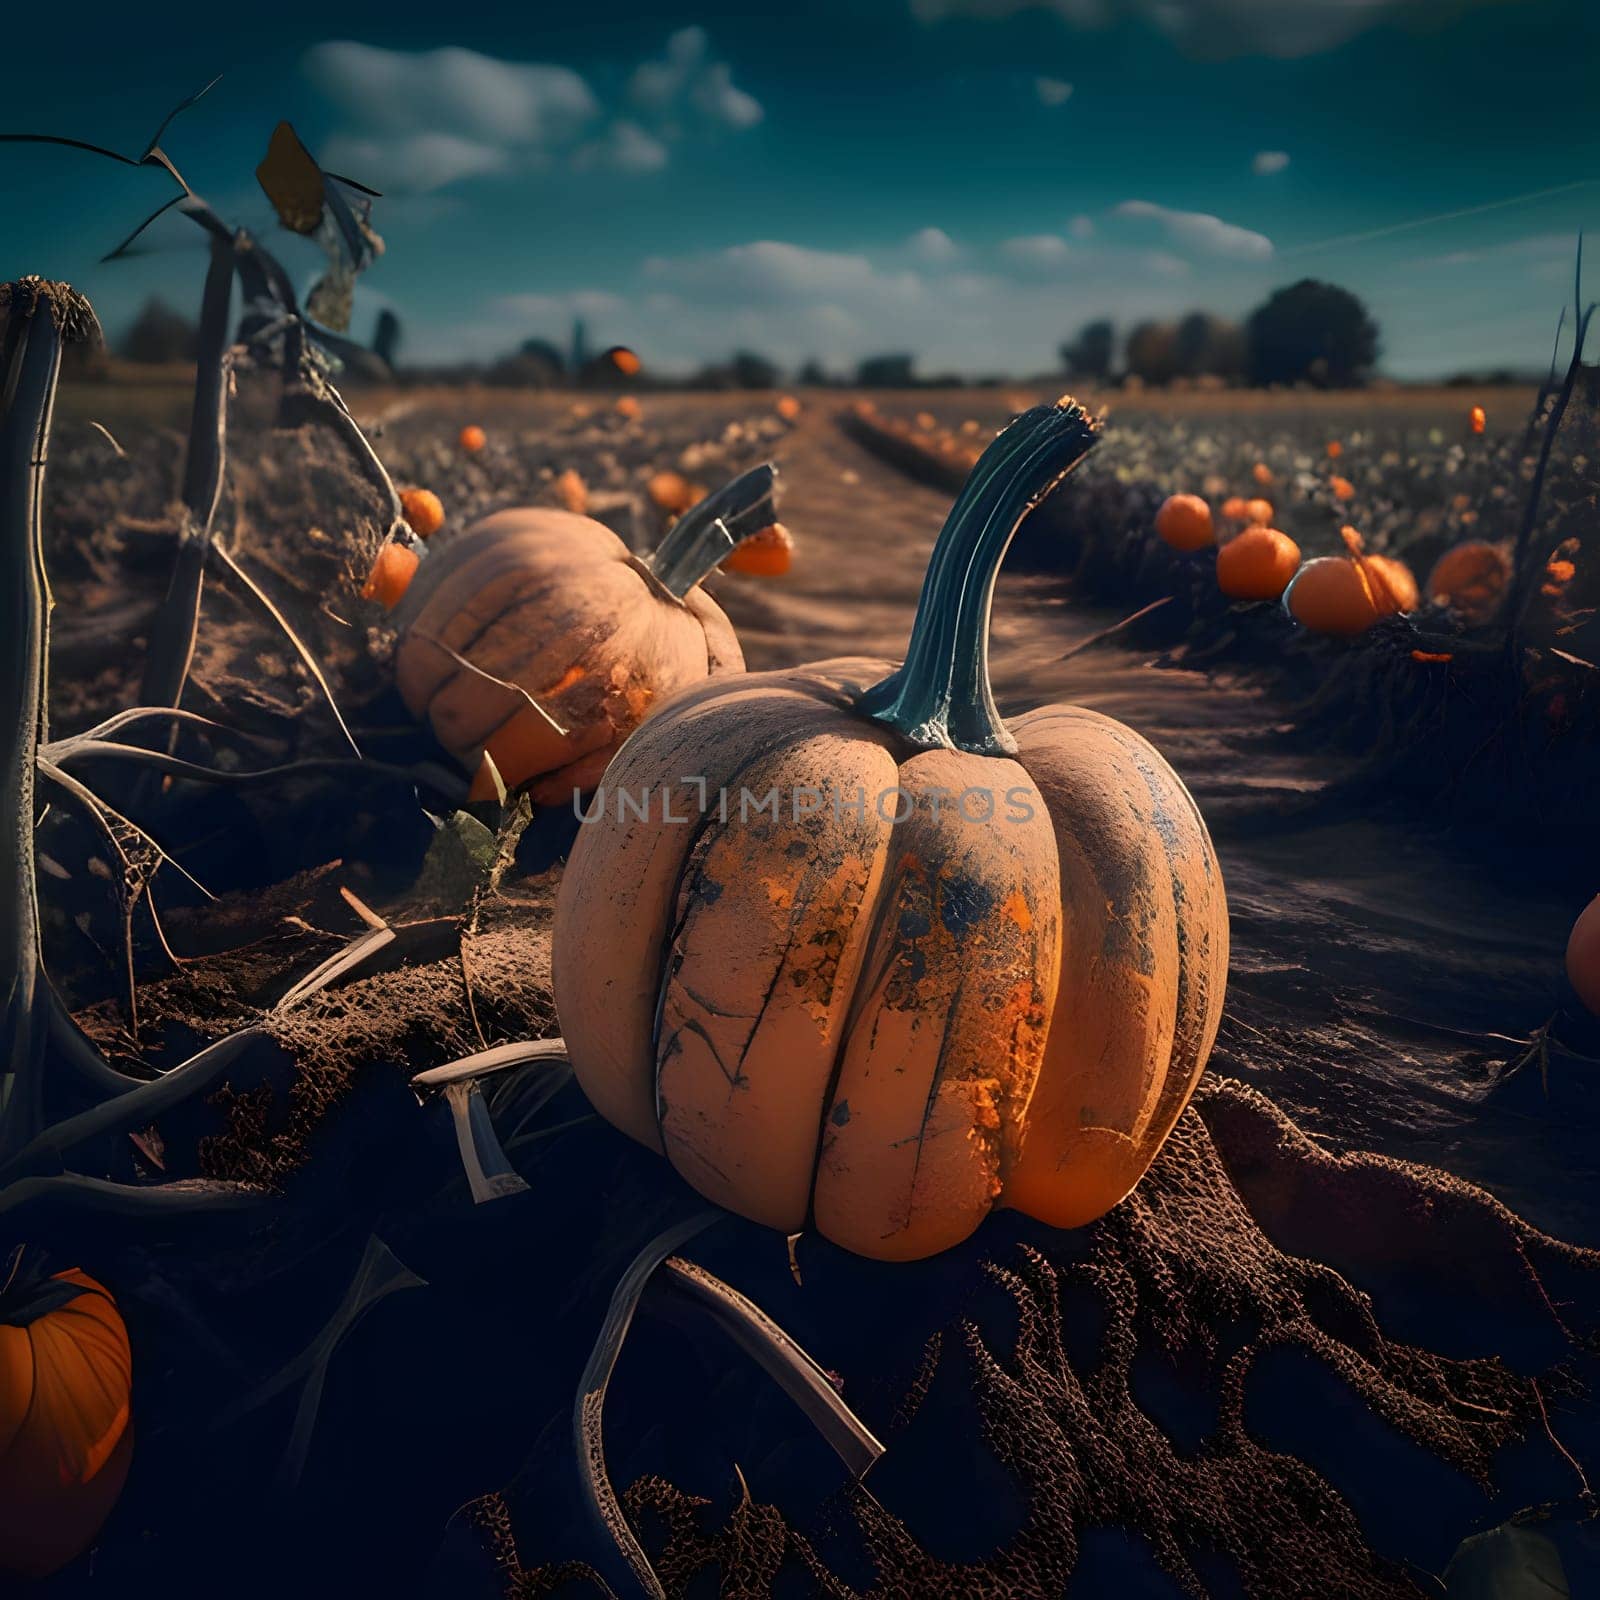 Pumpkin field and picked pumpkins left in the field. Pumpkin as a dish of thanksgiving for the harvest. by ThemesS